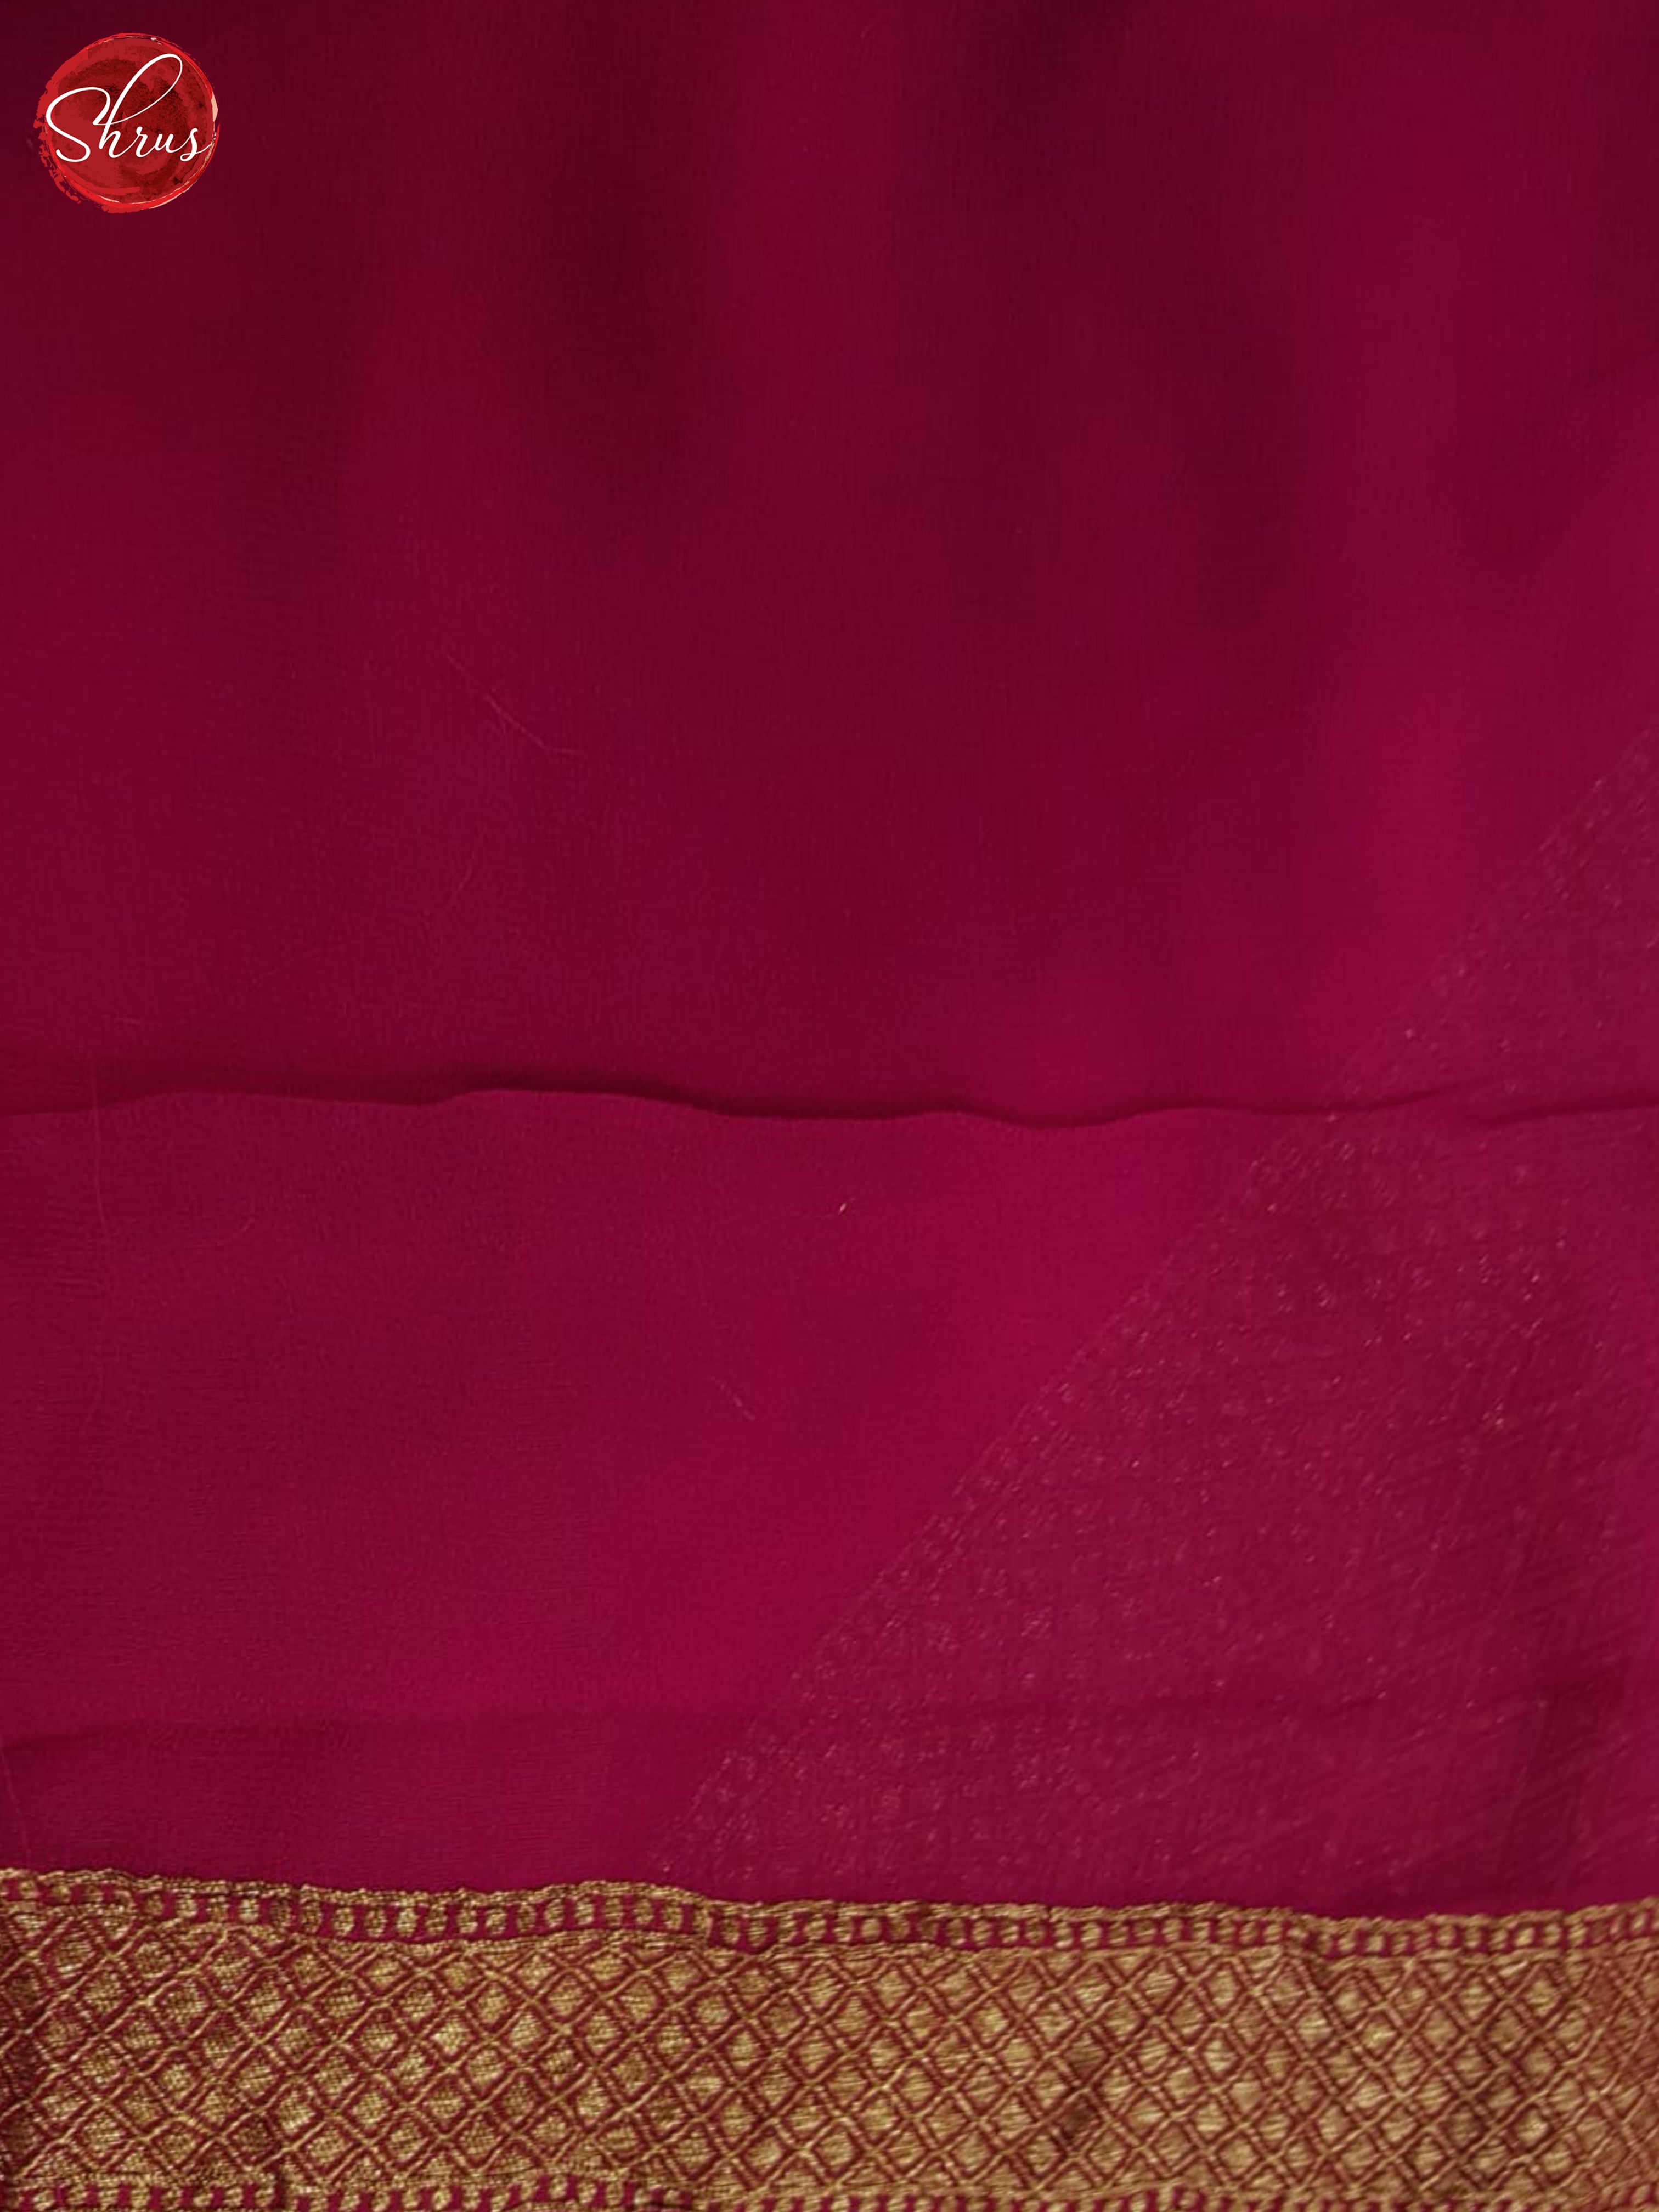 Blue And Pink-Georgette Silk Saree - Shop on ShrusEternity.com